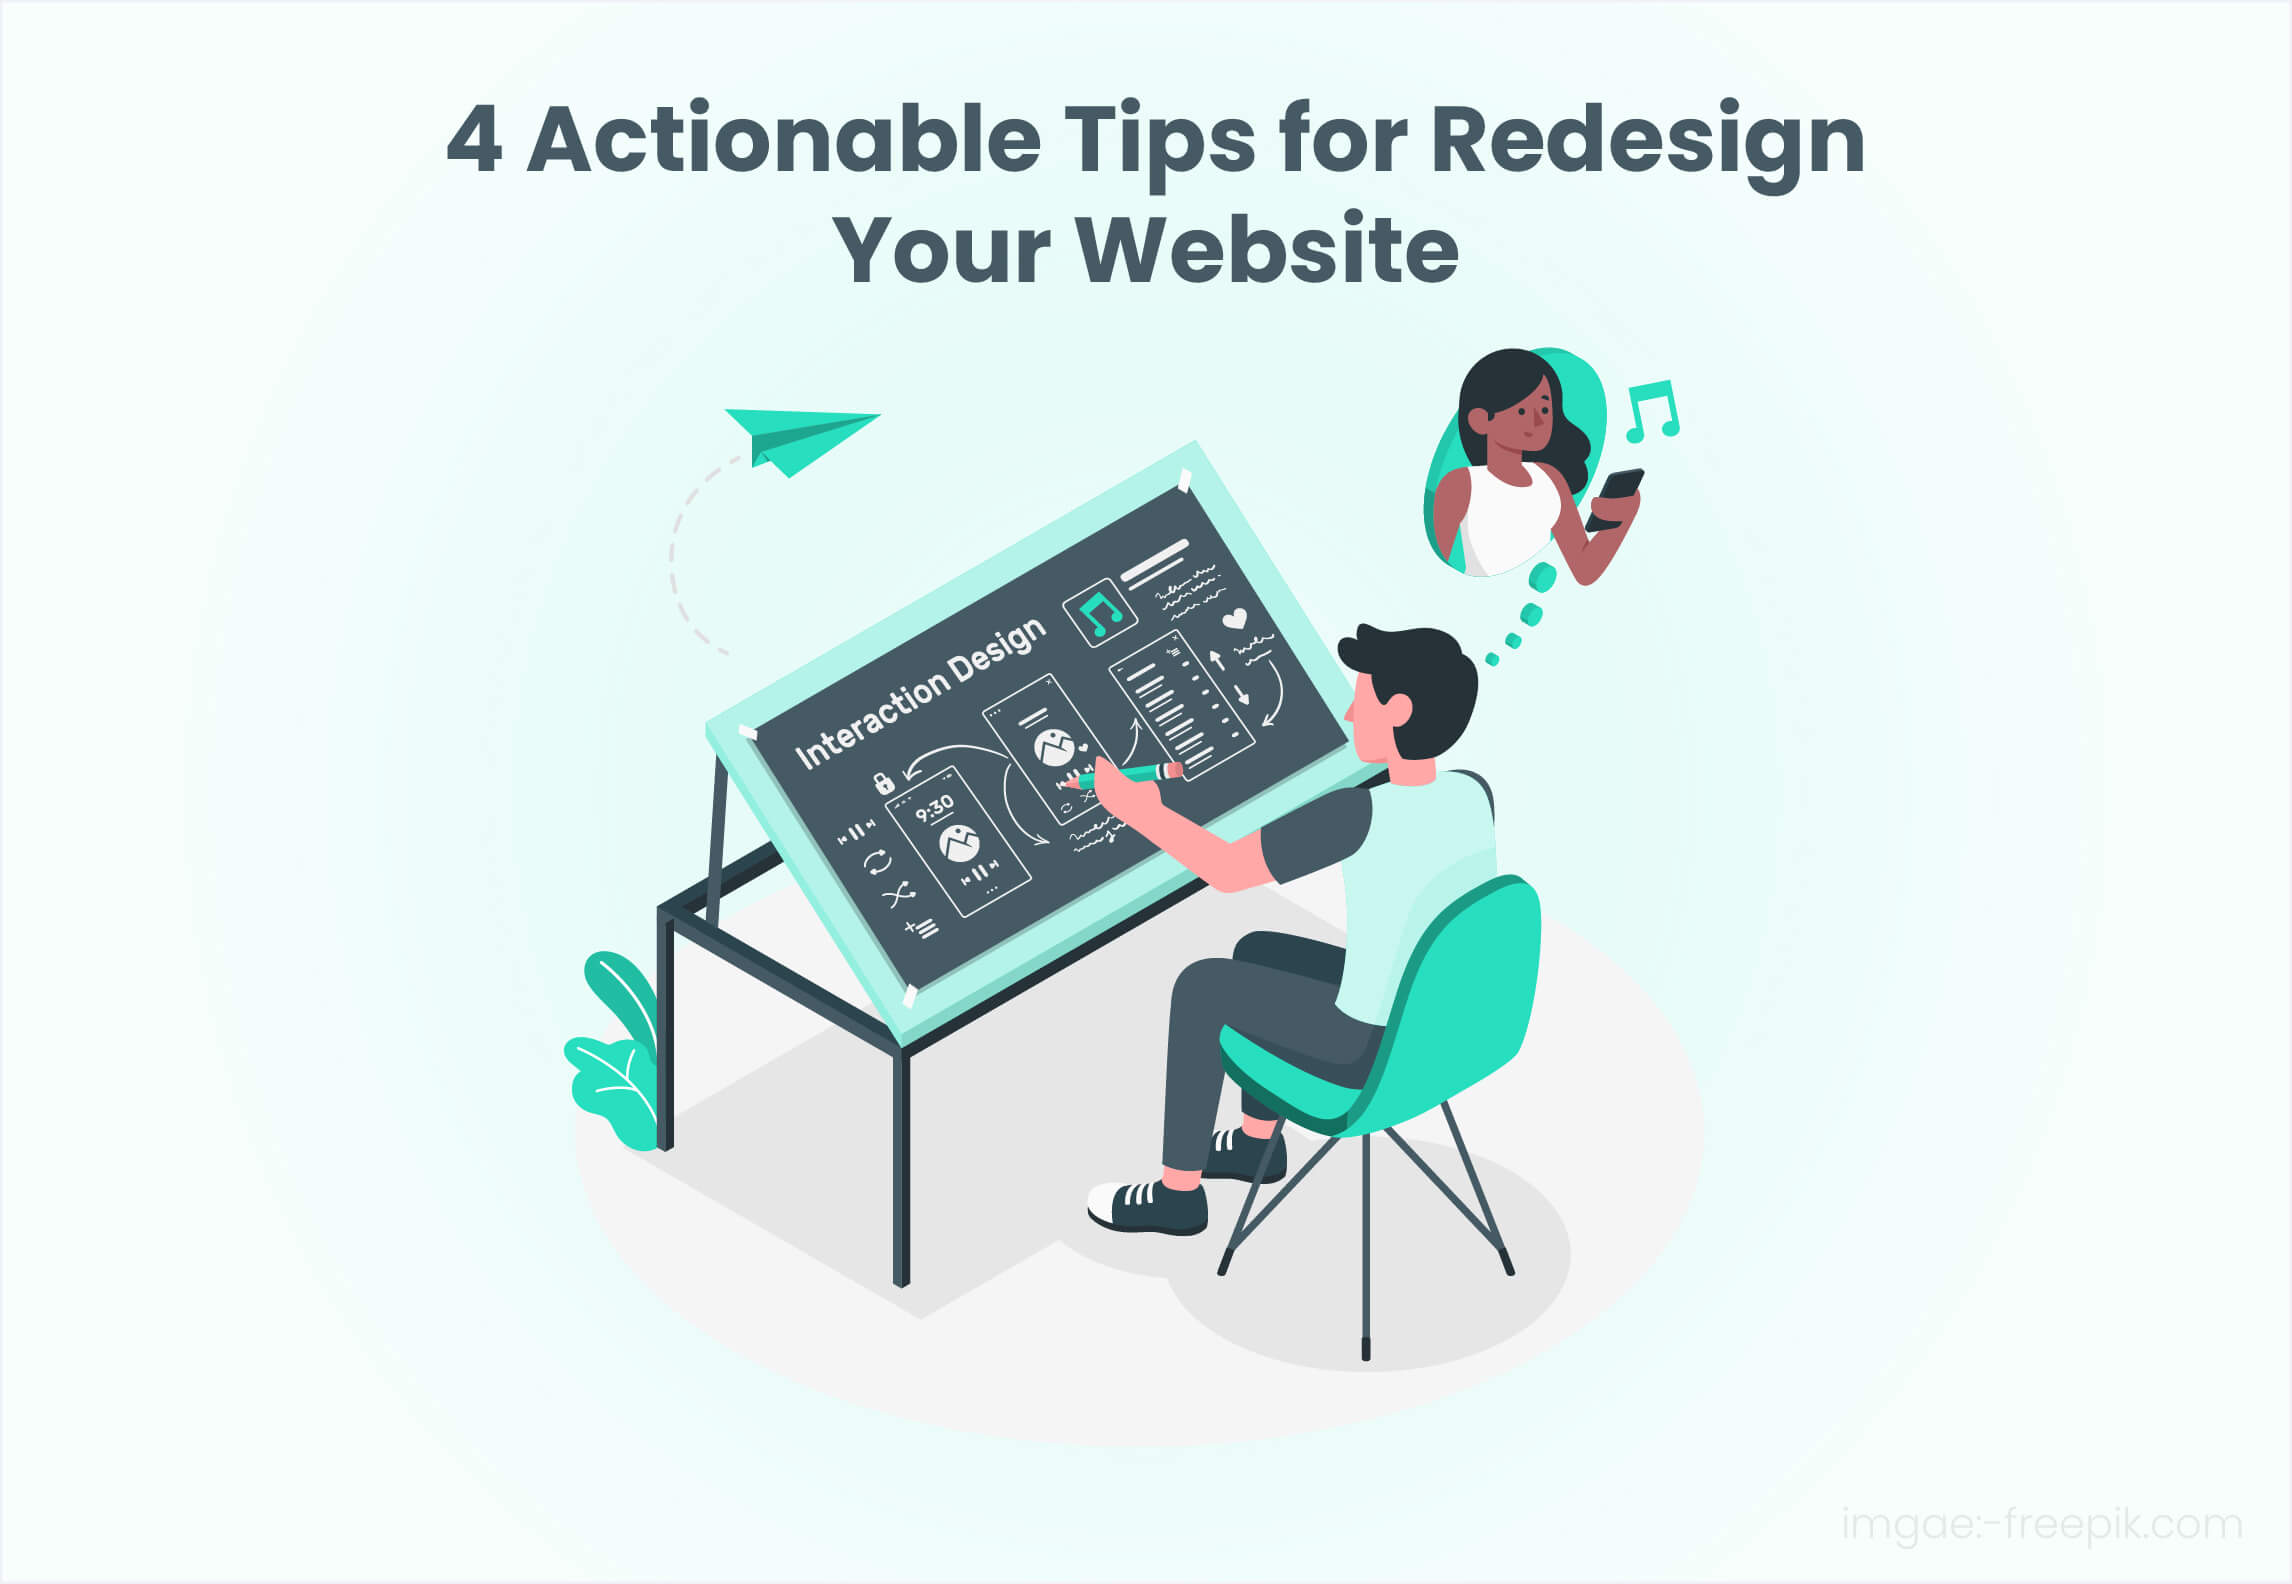 Top 4 Actionable Tips for Redesign Your Website.